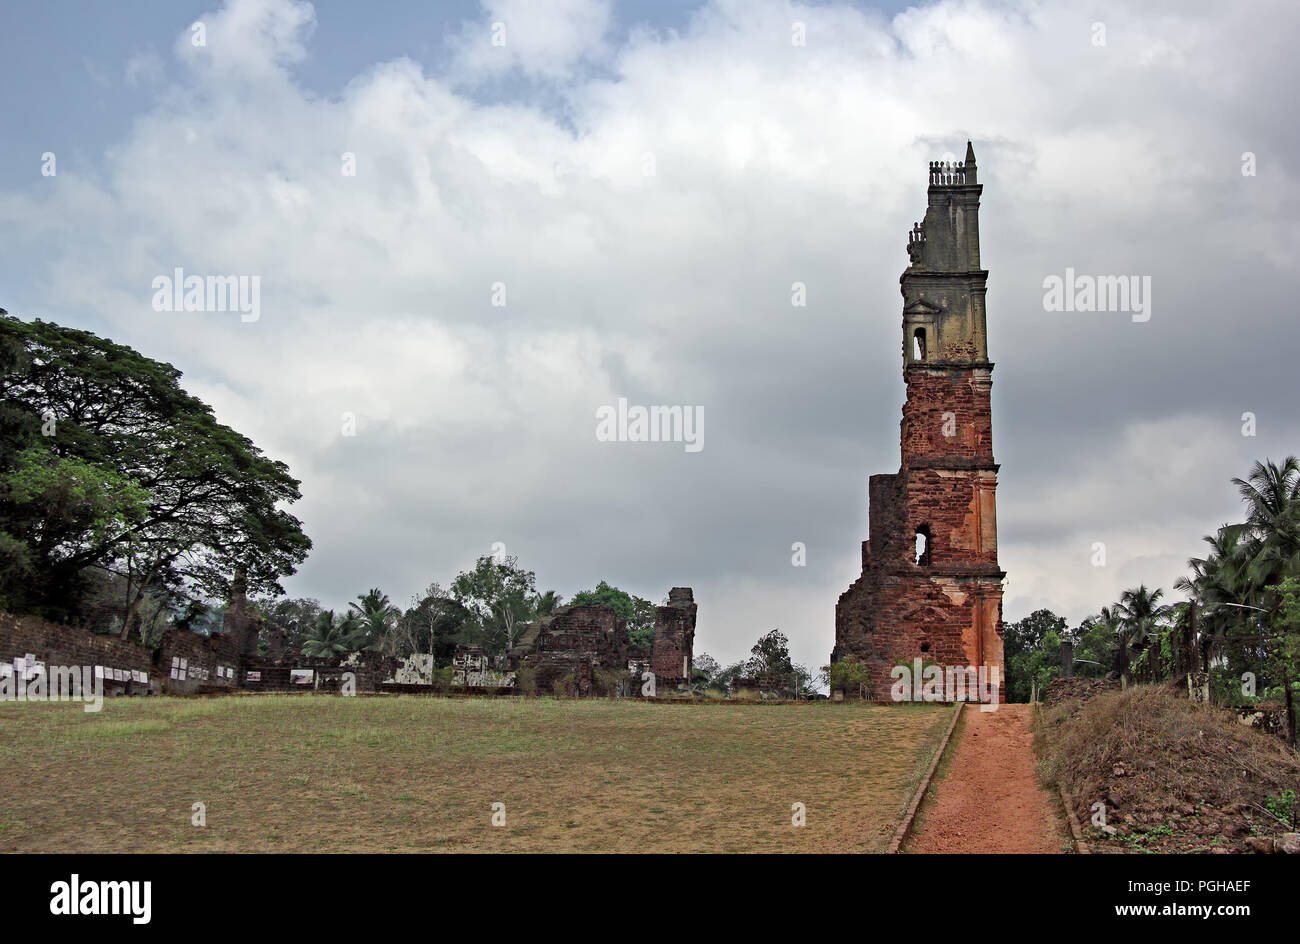 Ruins of tower of Church of St Augustine and part of monastery complex in Old Goa, India. Complex built in 1602 by Augustinian friars. Stock Photo